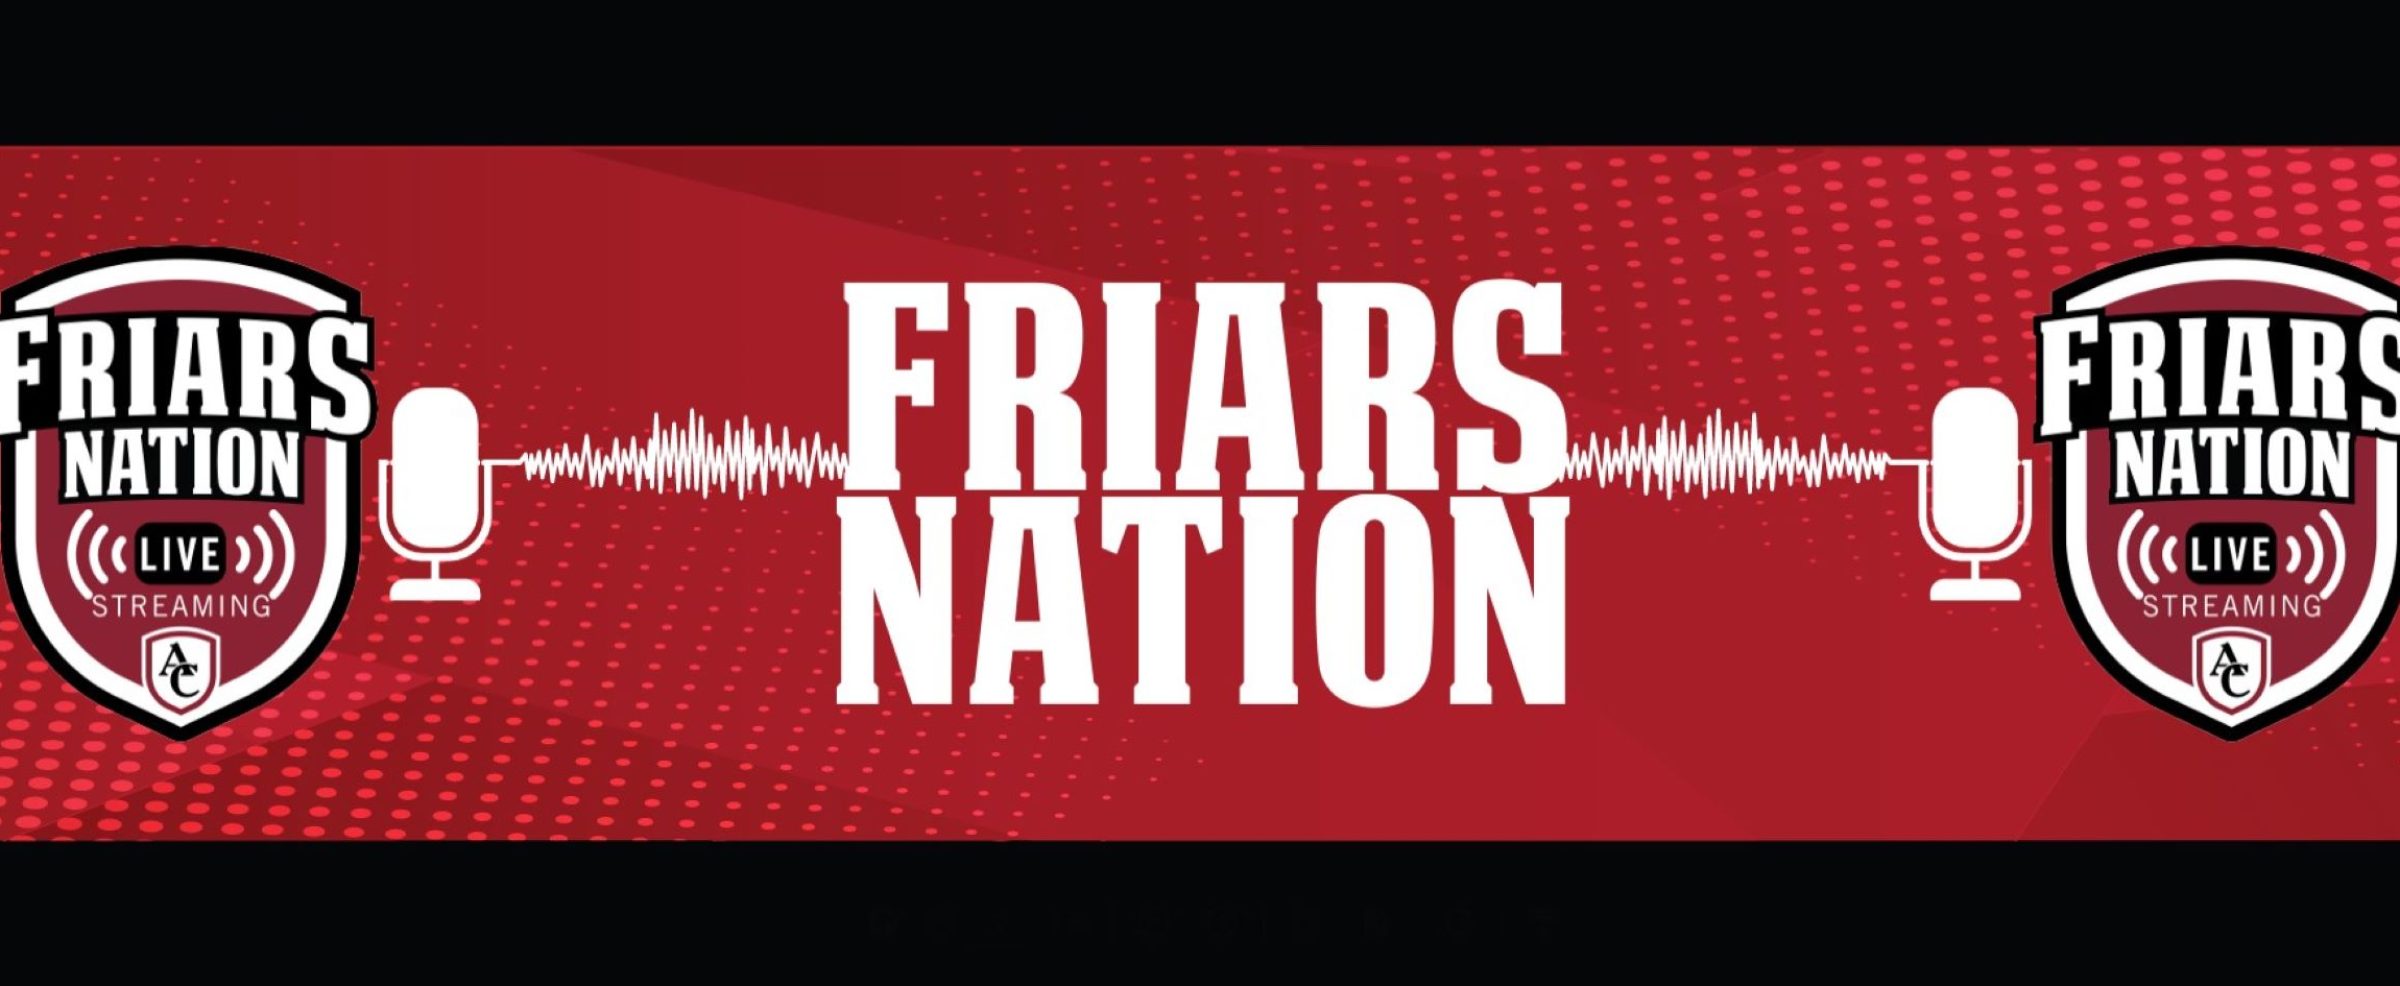 FRIARS NATION – Live Streaming